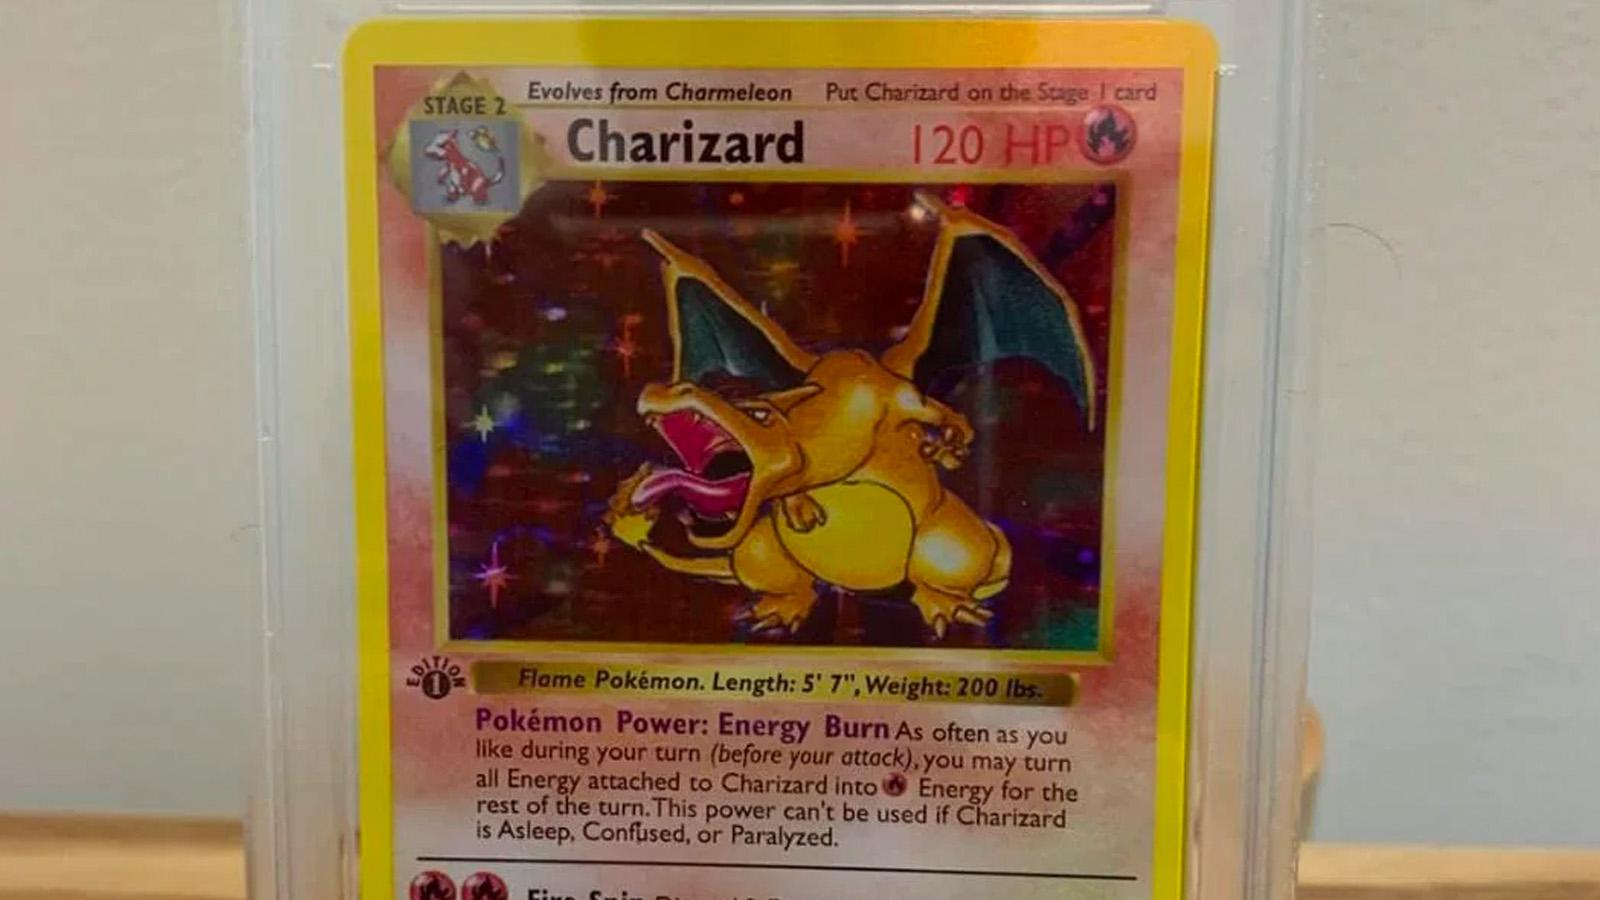 Pokémon Charizard card sold for whopping $420K at auction